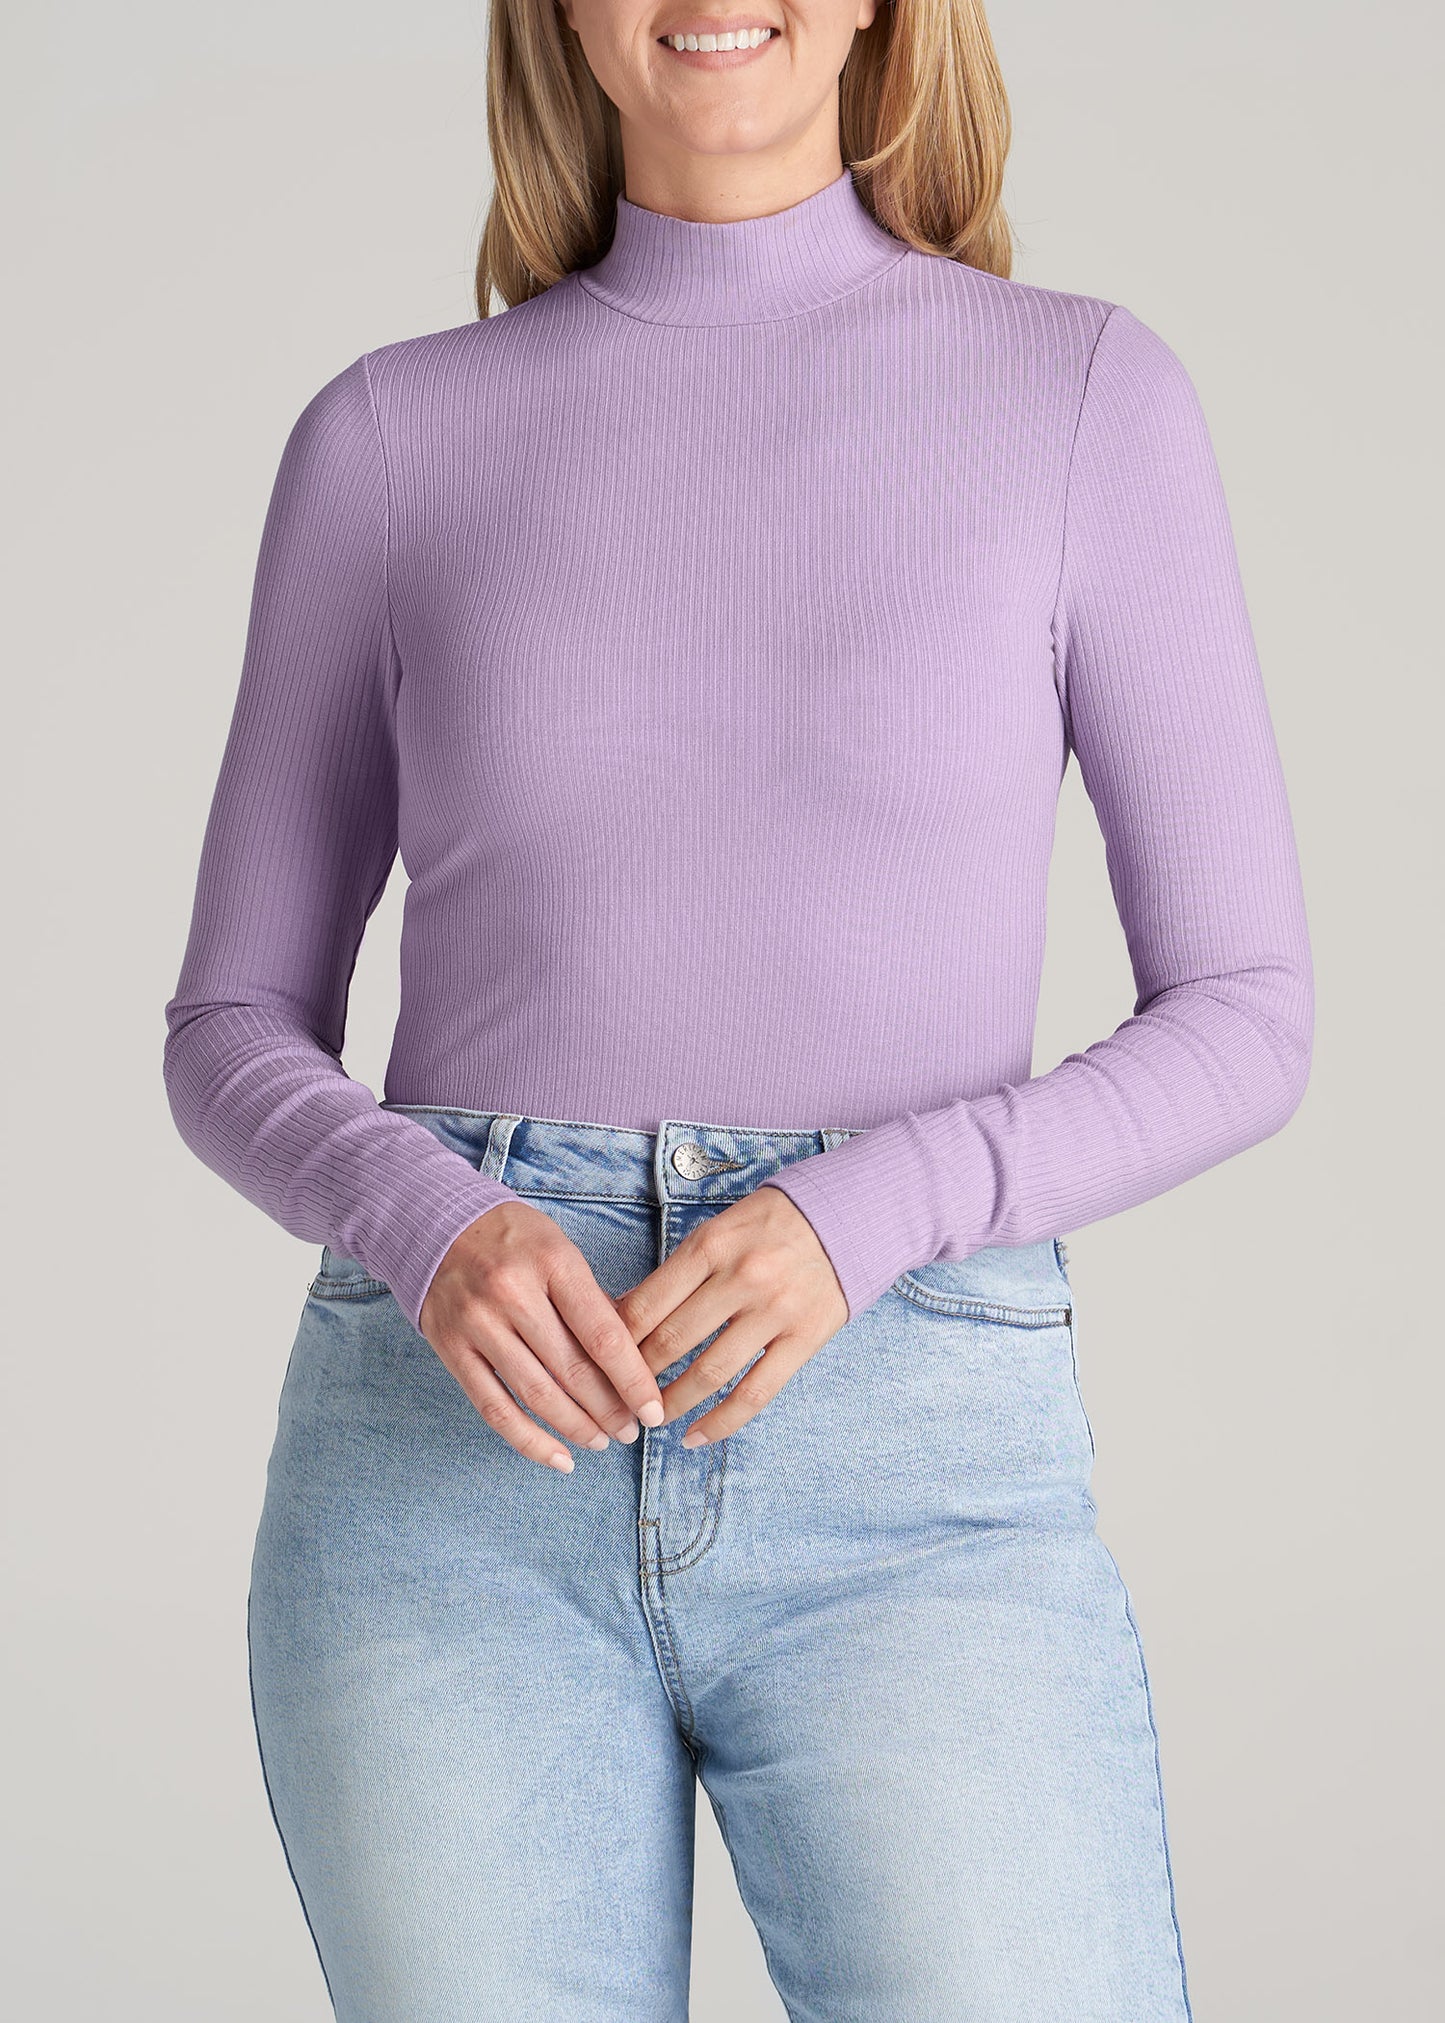 Hyades Braided Long Sleeve Top, Lilac